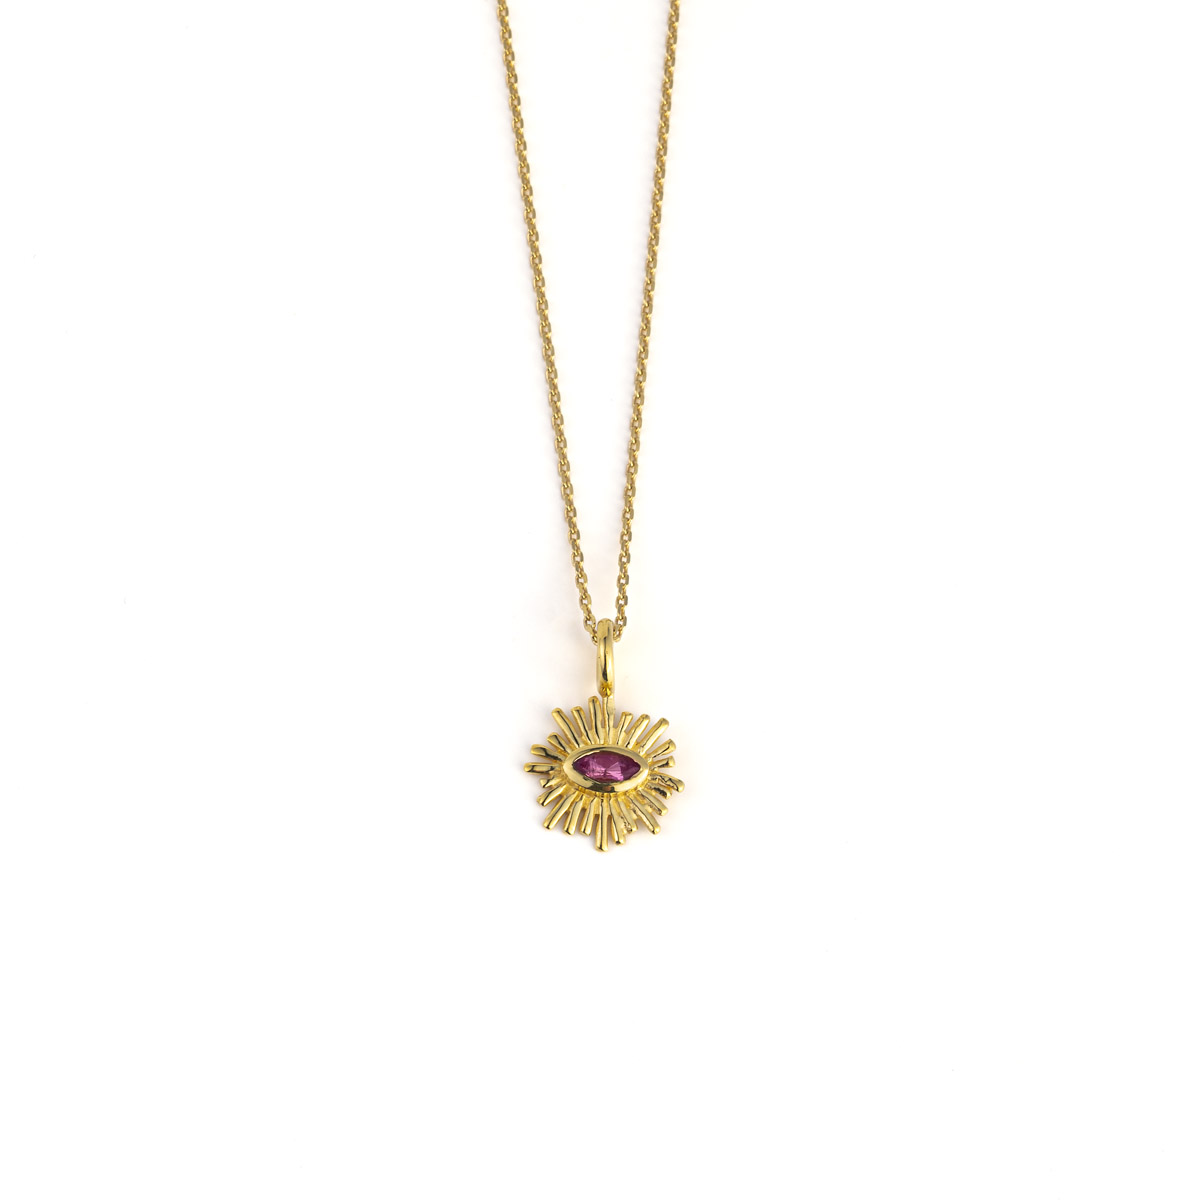 Tourmaline Sun Necklace - Sterling Silver and Gold Plated